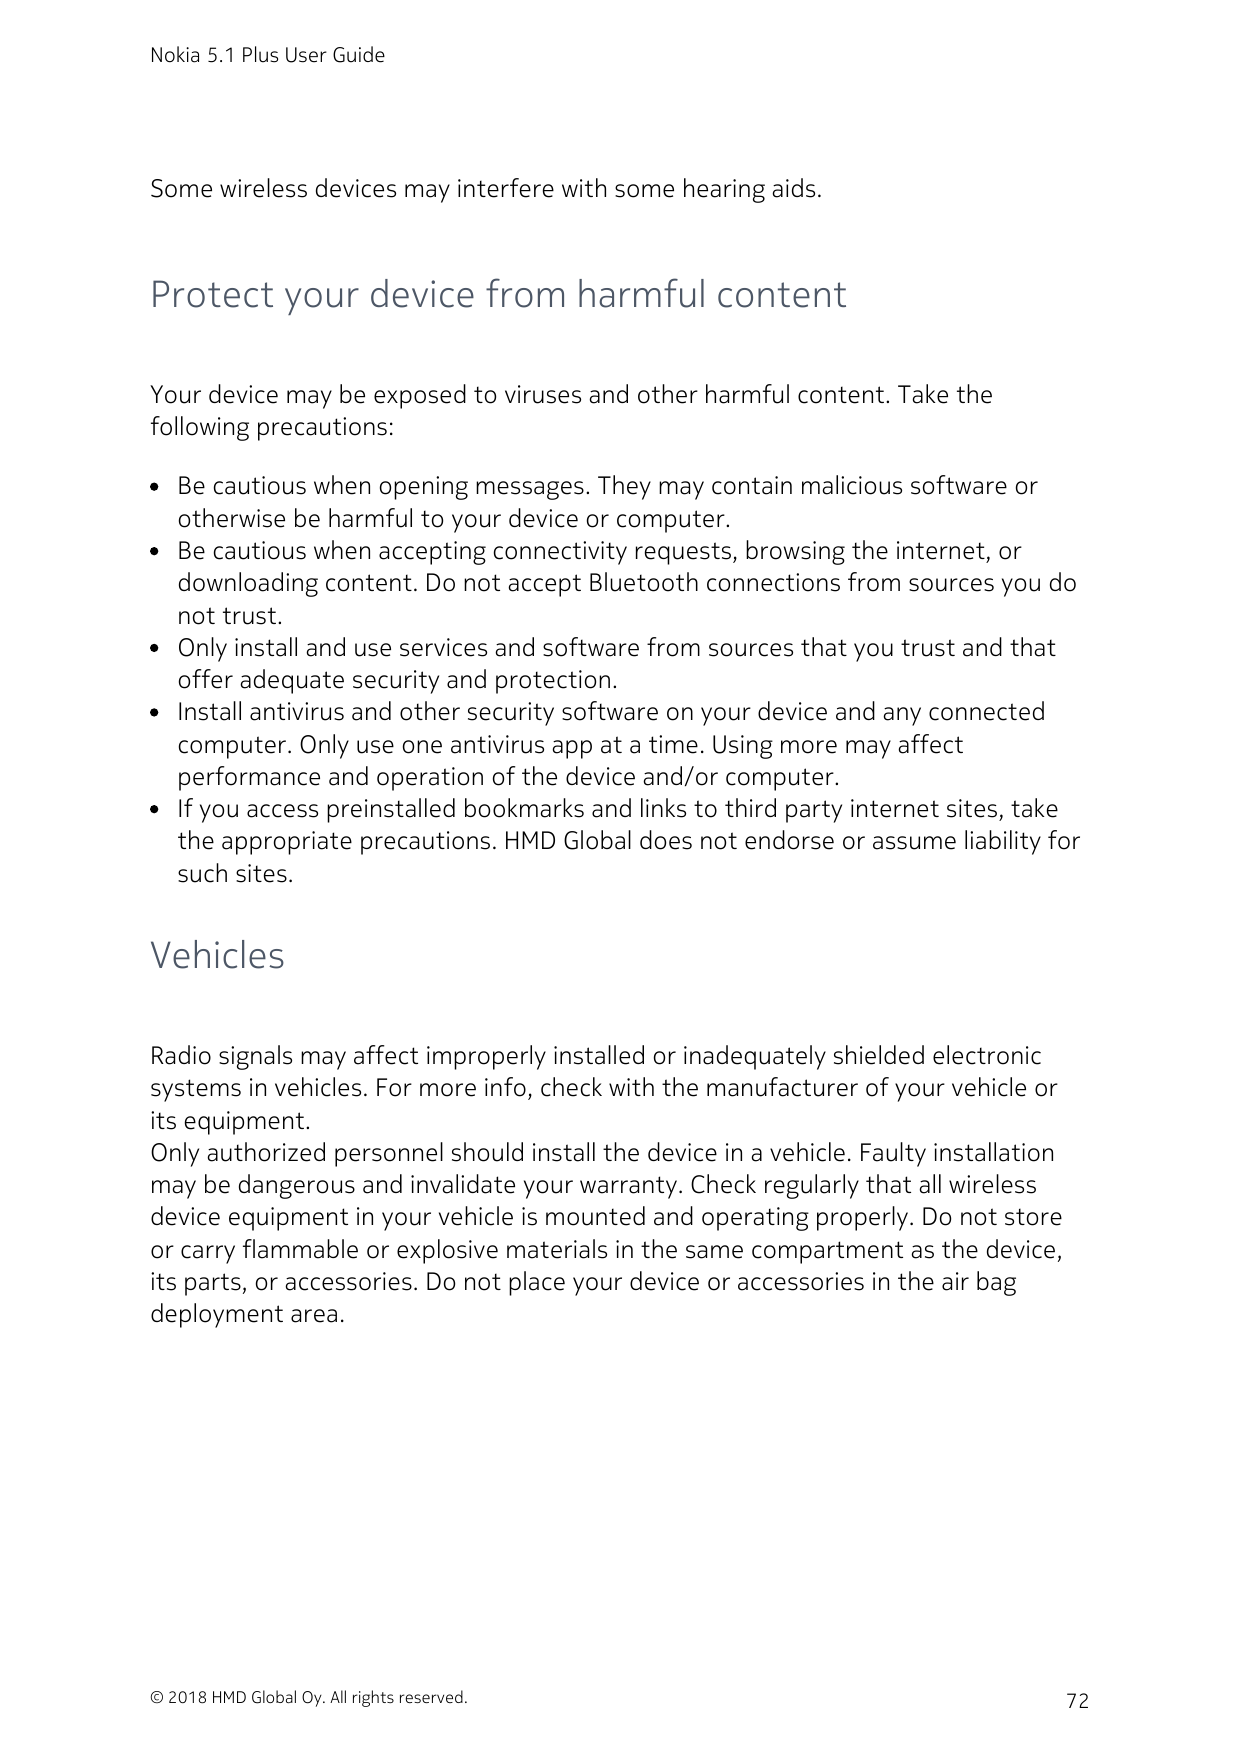 Nokia 5.1 Plus User GuideSome wireless devices may interfere with some hearing aids.Protect your device from harmful contentYour